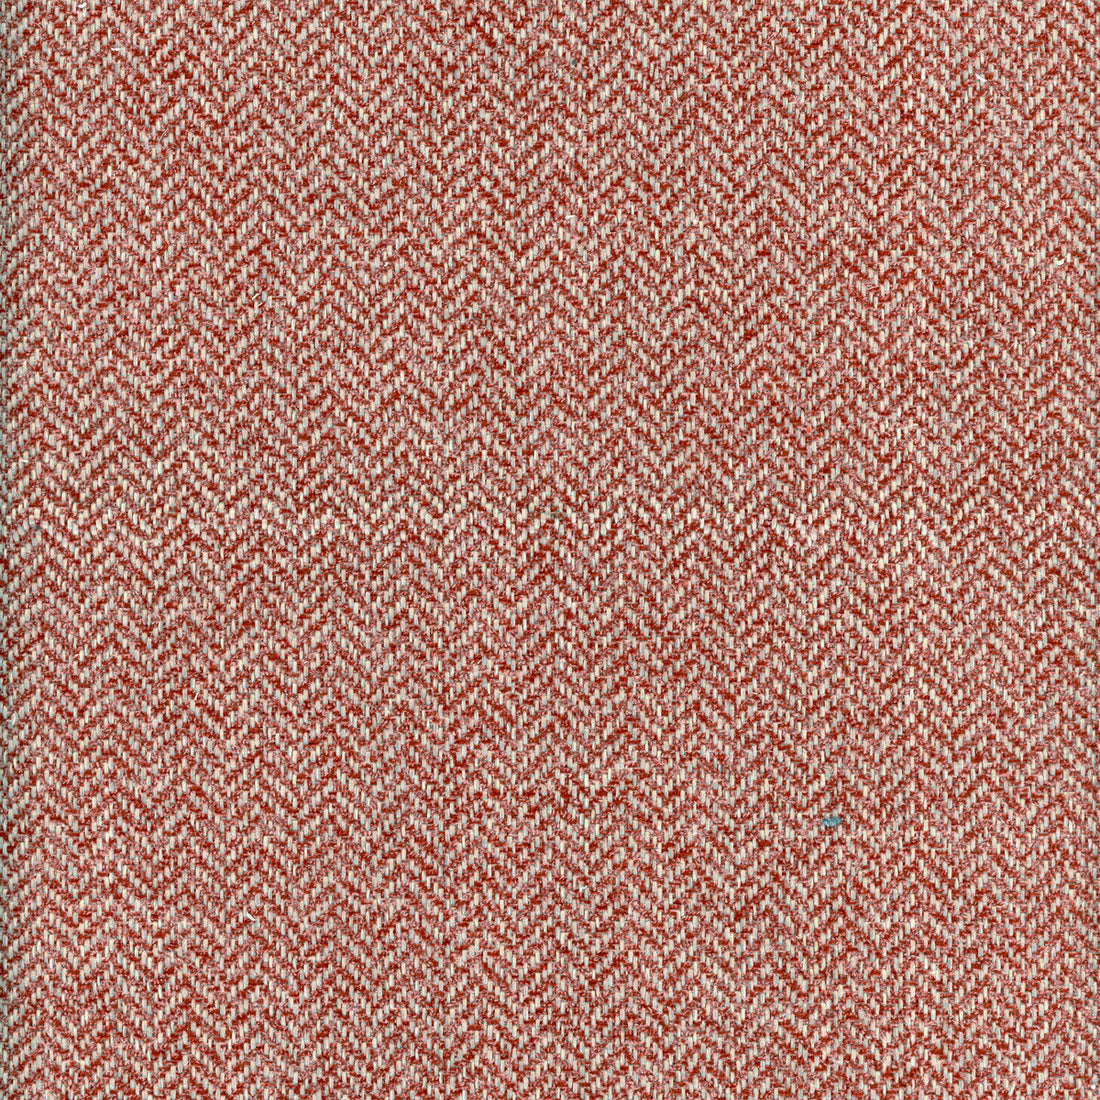 Nevada fabric in fall color - pattern AM100329.9.0 - by Kravet Couture in the Andrew Martin Canyon collection